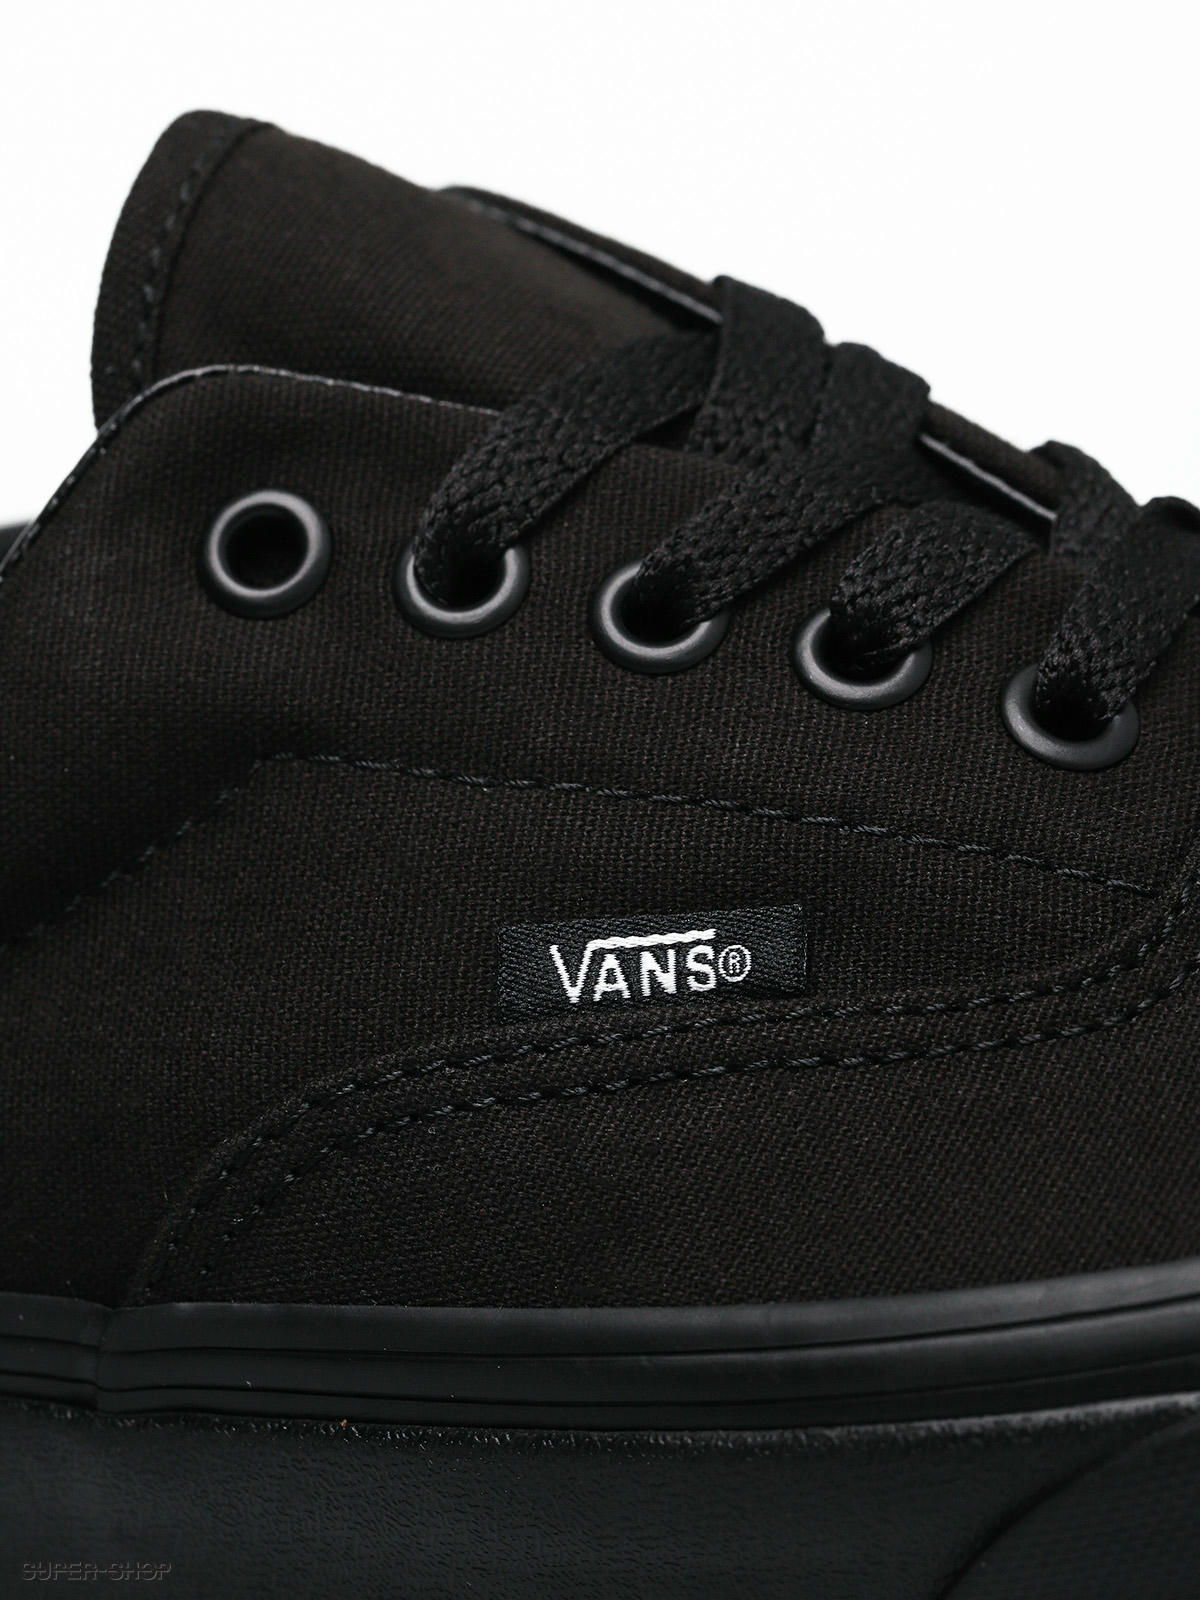 vans shoes black and white 2013